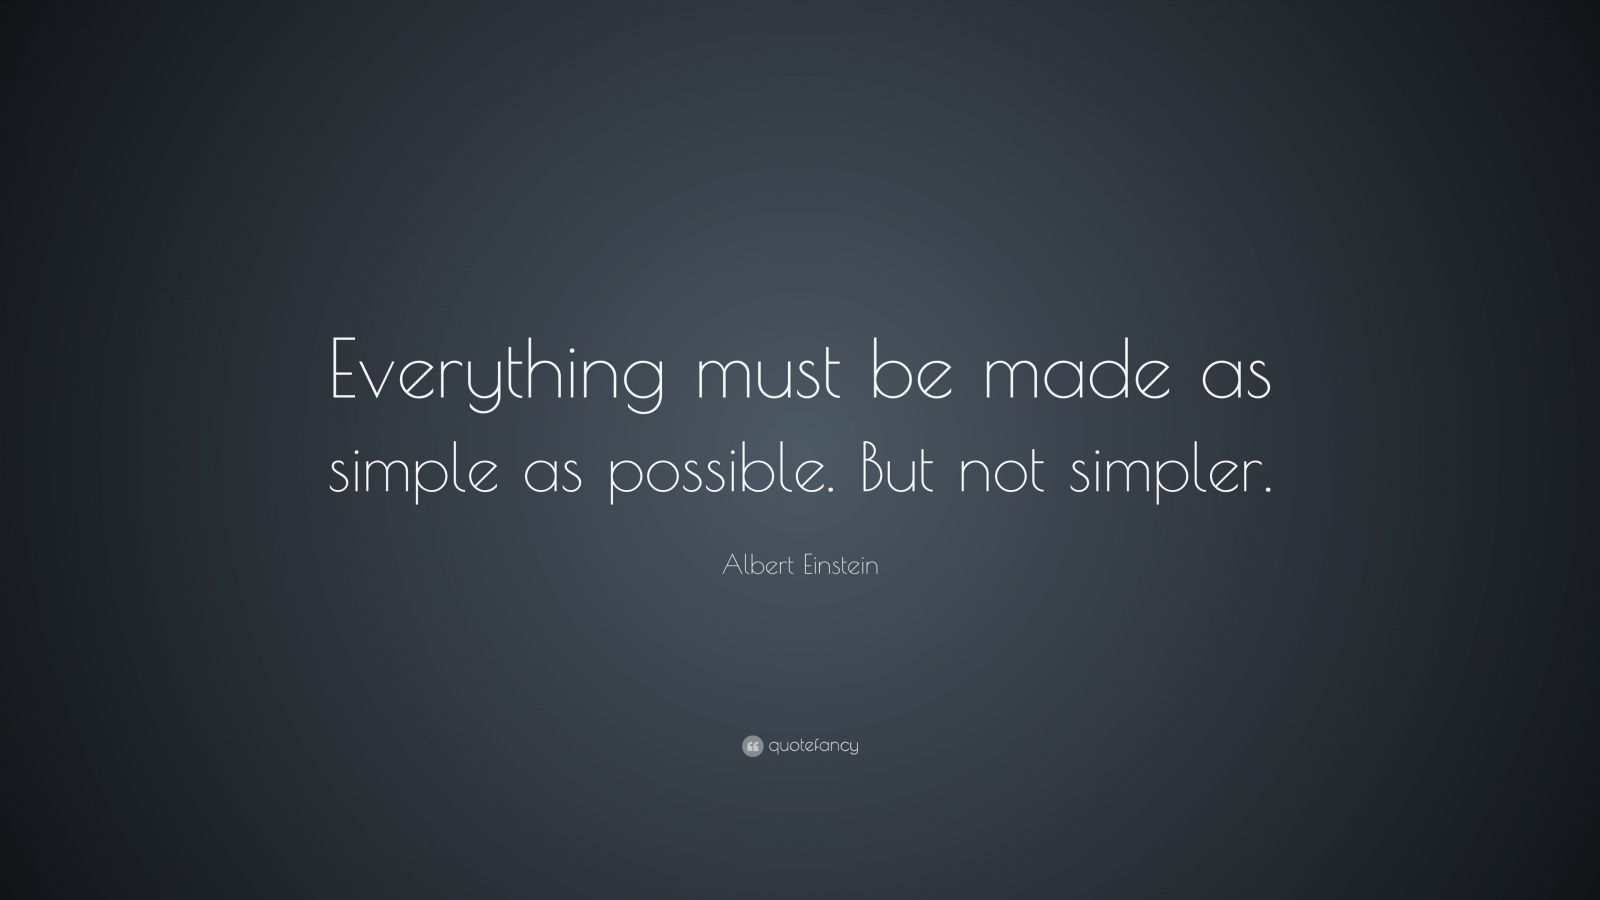 Albert Einstein Quote: “Everything must be made as simple as possible. But not simpler.” (23 wallpaper)